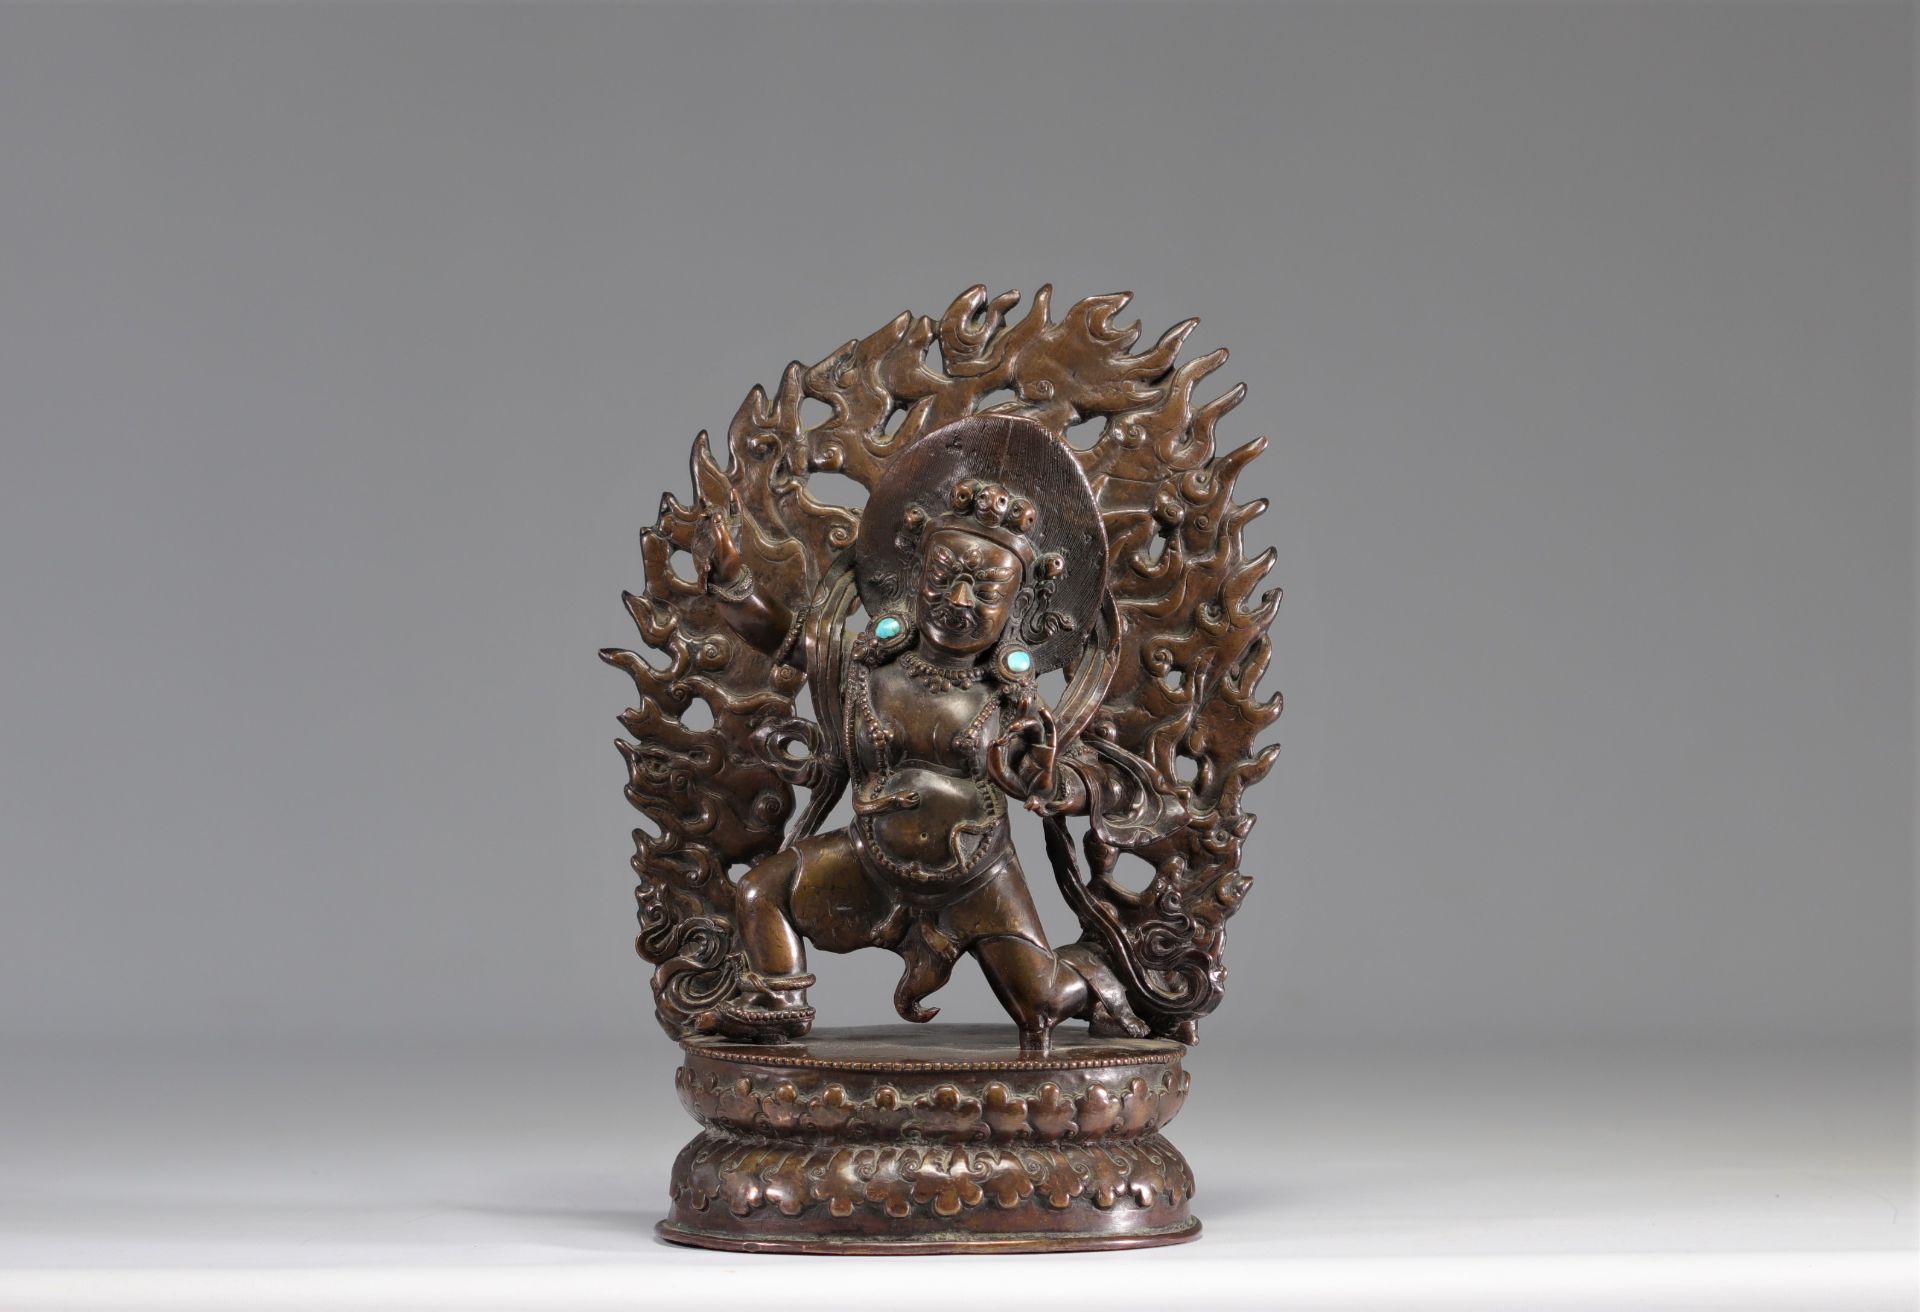 Large sculpture of a Tibetan divinity in bronze inlaid with turquoise, 18th century